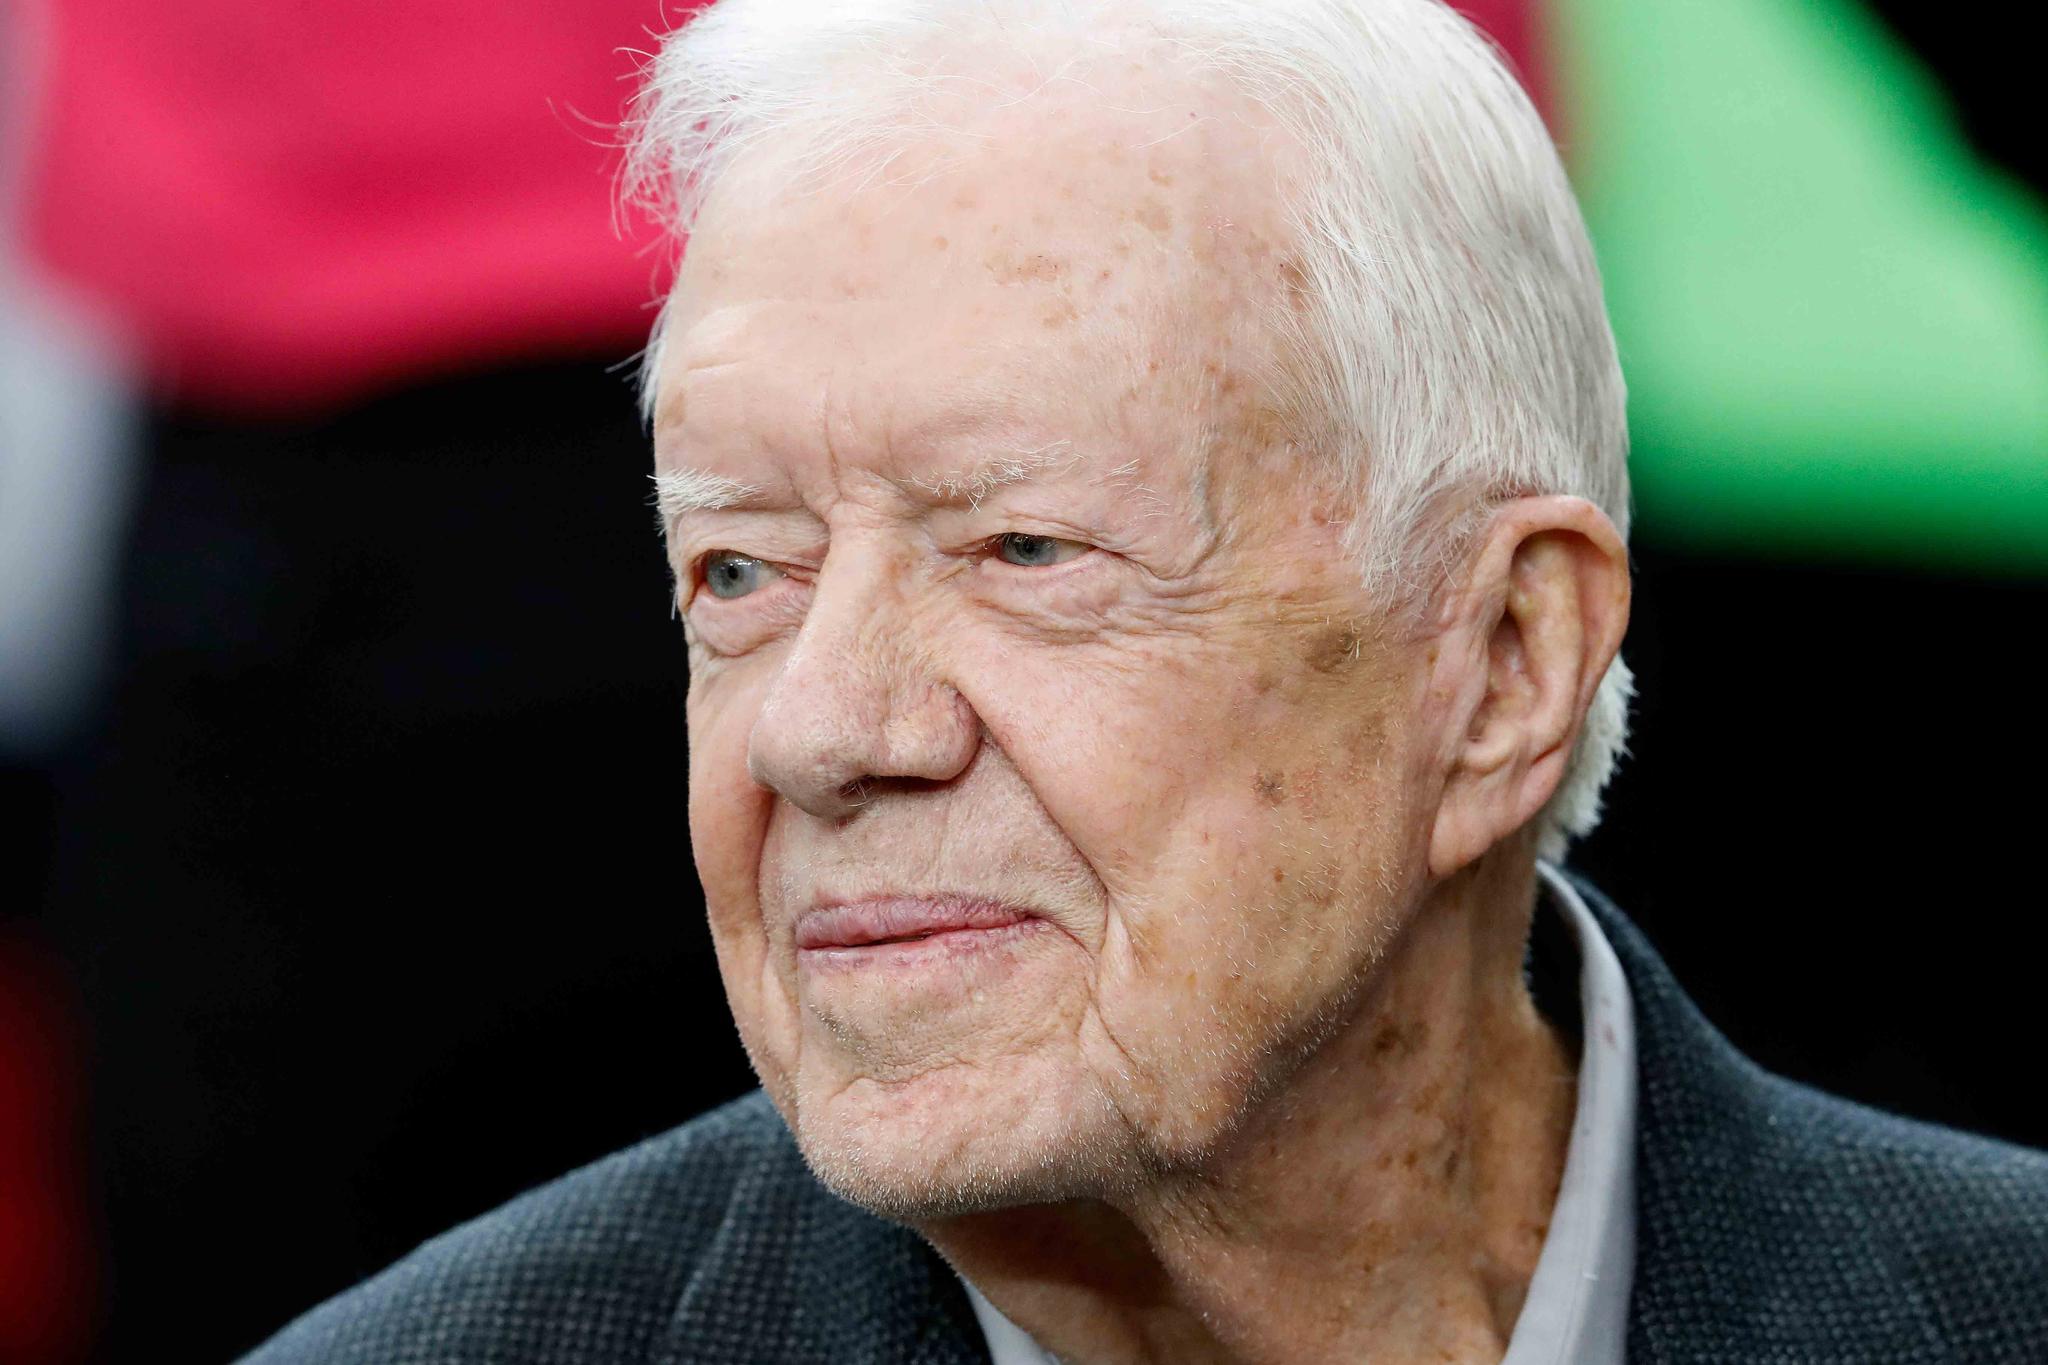 Former President Jimmy Carter sits on the Atlanta Falcons bench before the first half of an NFL football game between the Falcons and the San Diego Chargers, Sunday, Oct. 23, 2016